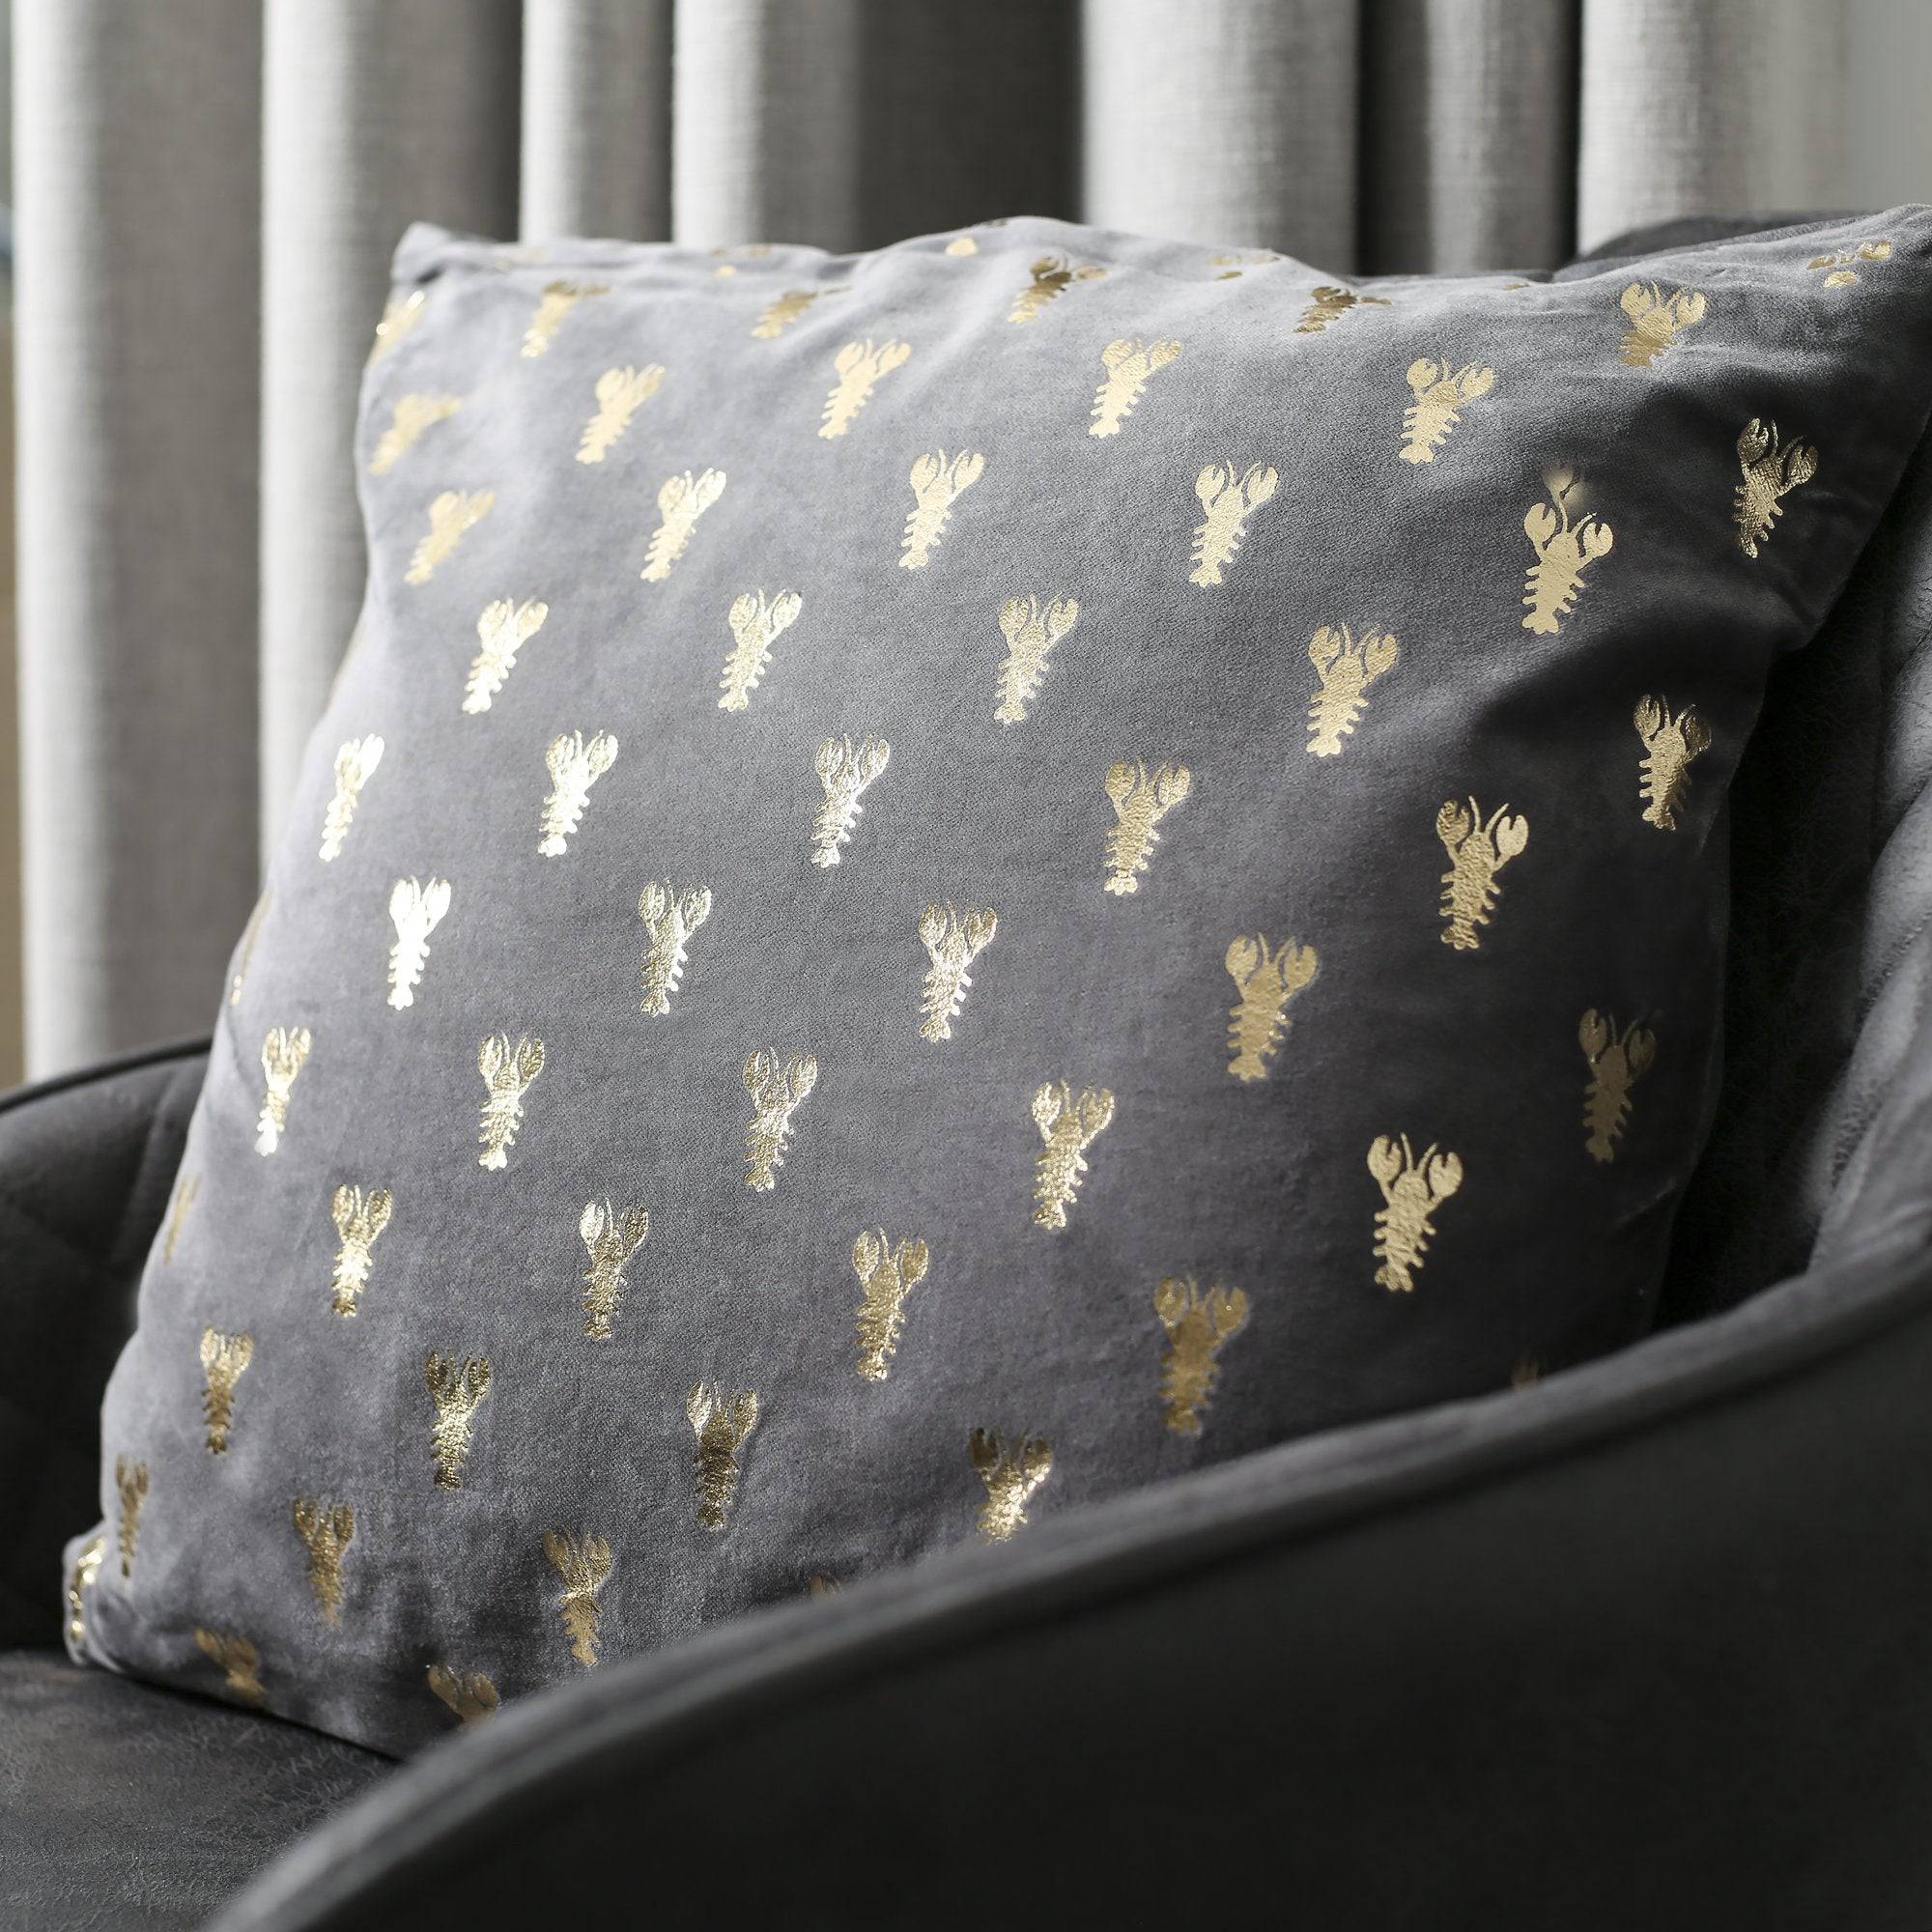 Grey & Gold Lobster Print Cushion - 45 x 45cm 8714503328173 only5pounds-com